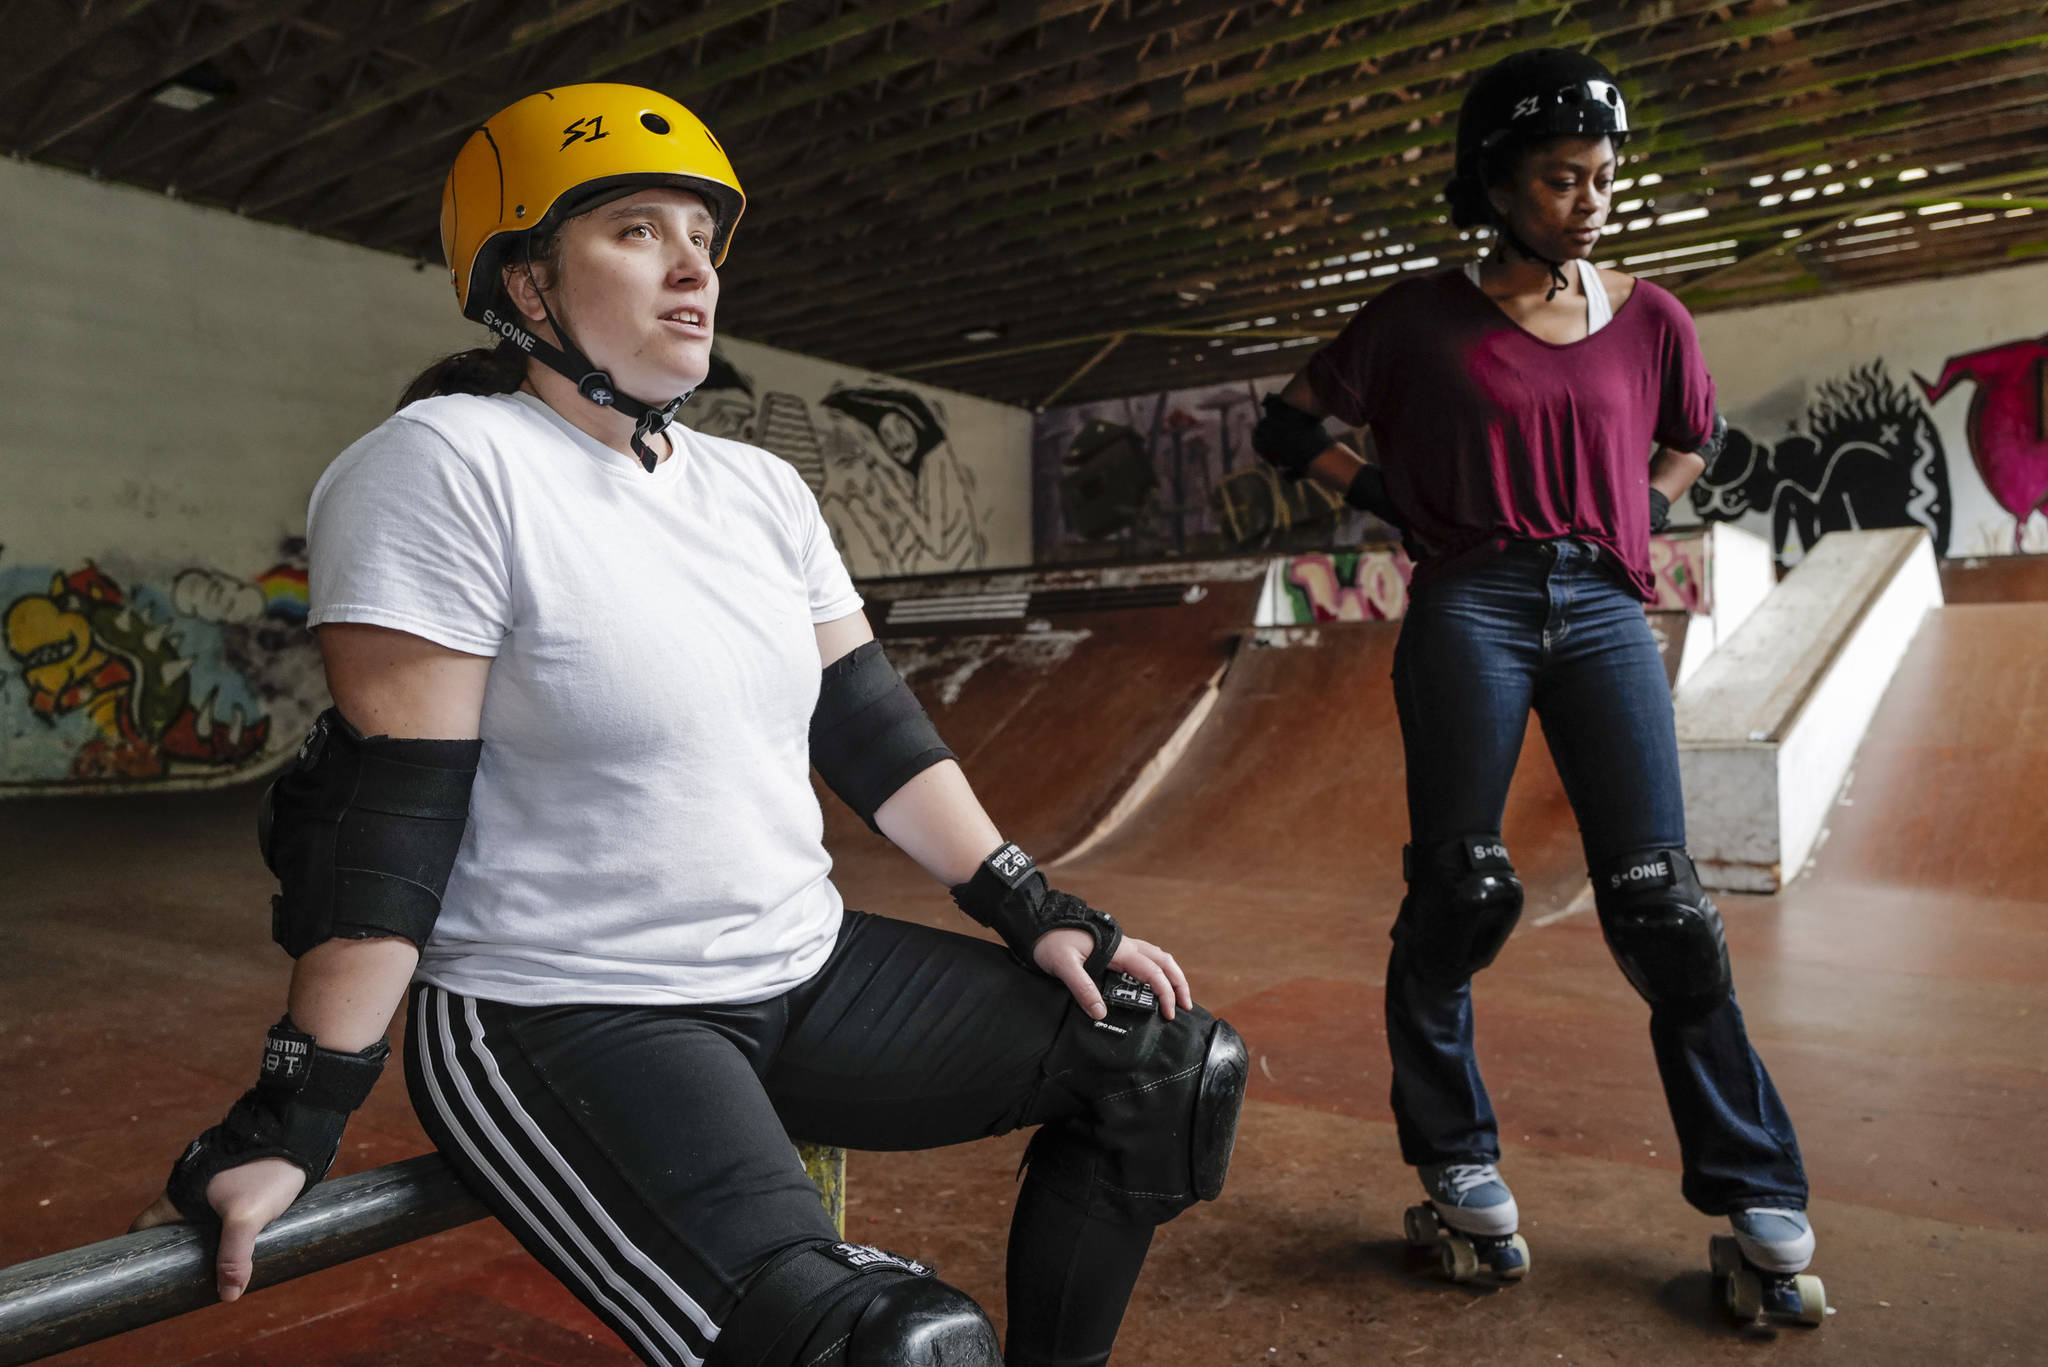 Shabadrang Khalsa, left, and Jennifer Gross, who skate with the Juneau Rollergirls, talk about what rollerskating means to them during a break getting their daily skate in at the Pipeline Skate Park on Friday, Oct. 11, 2019. The two are skating every day as part of a challenge to every day for a year. (Michael Penn | Juneau Empire)